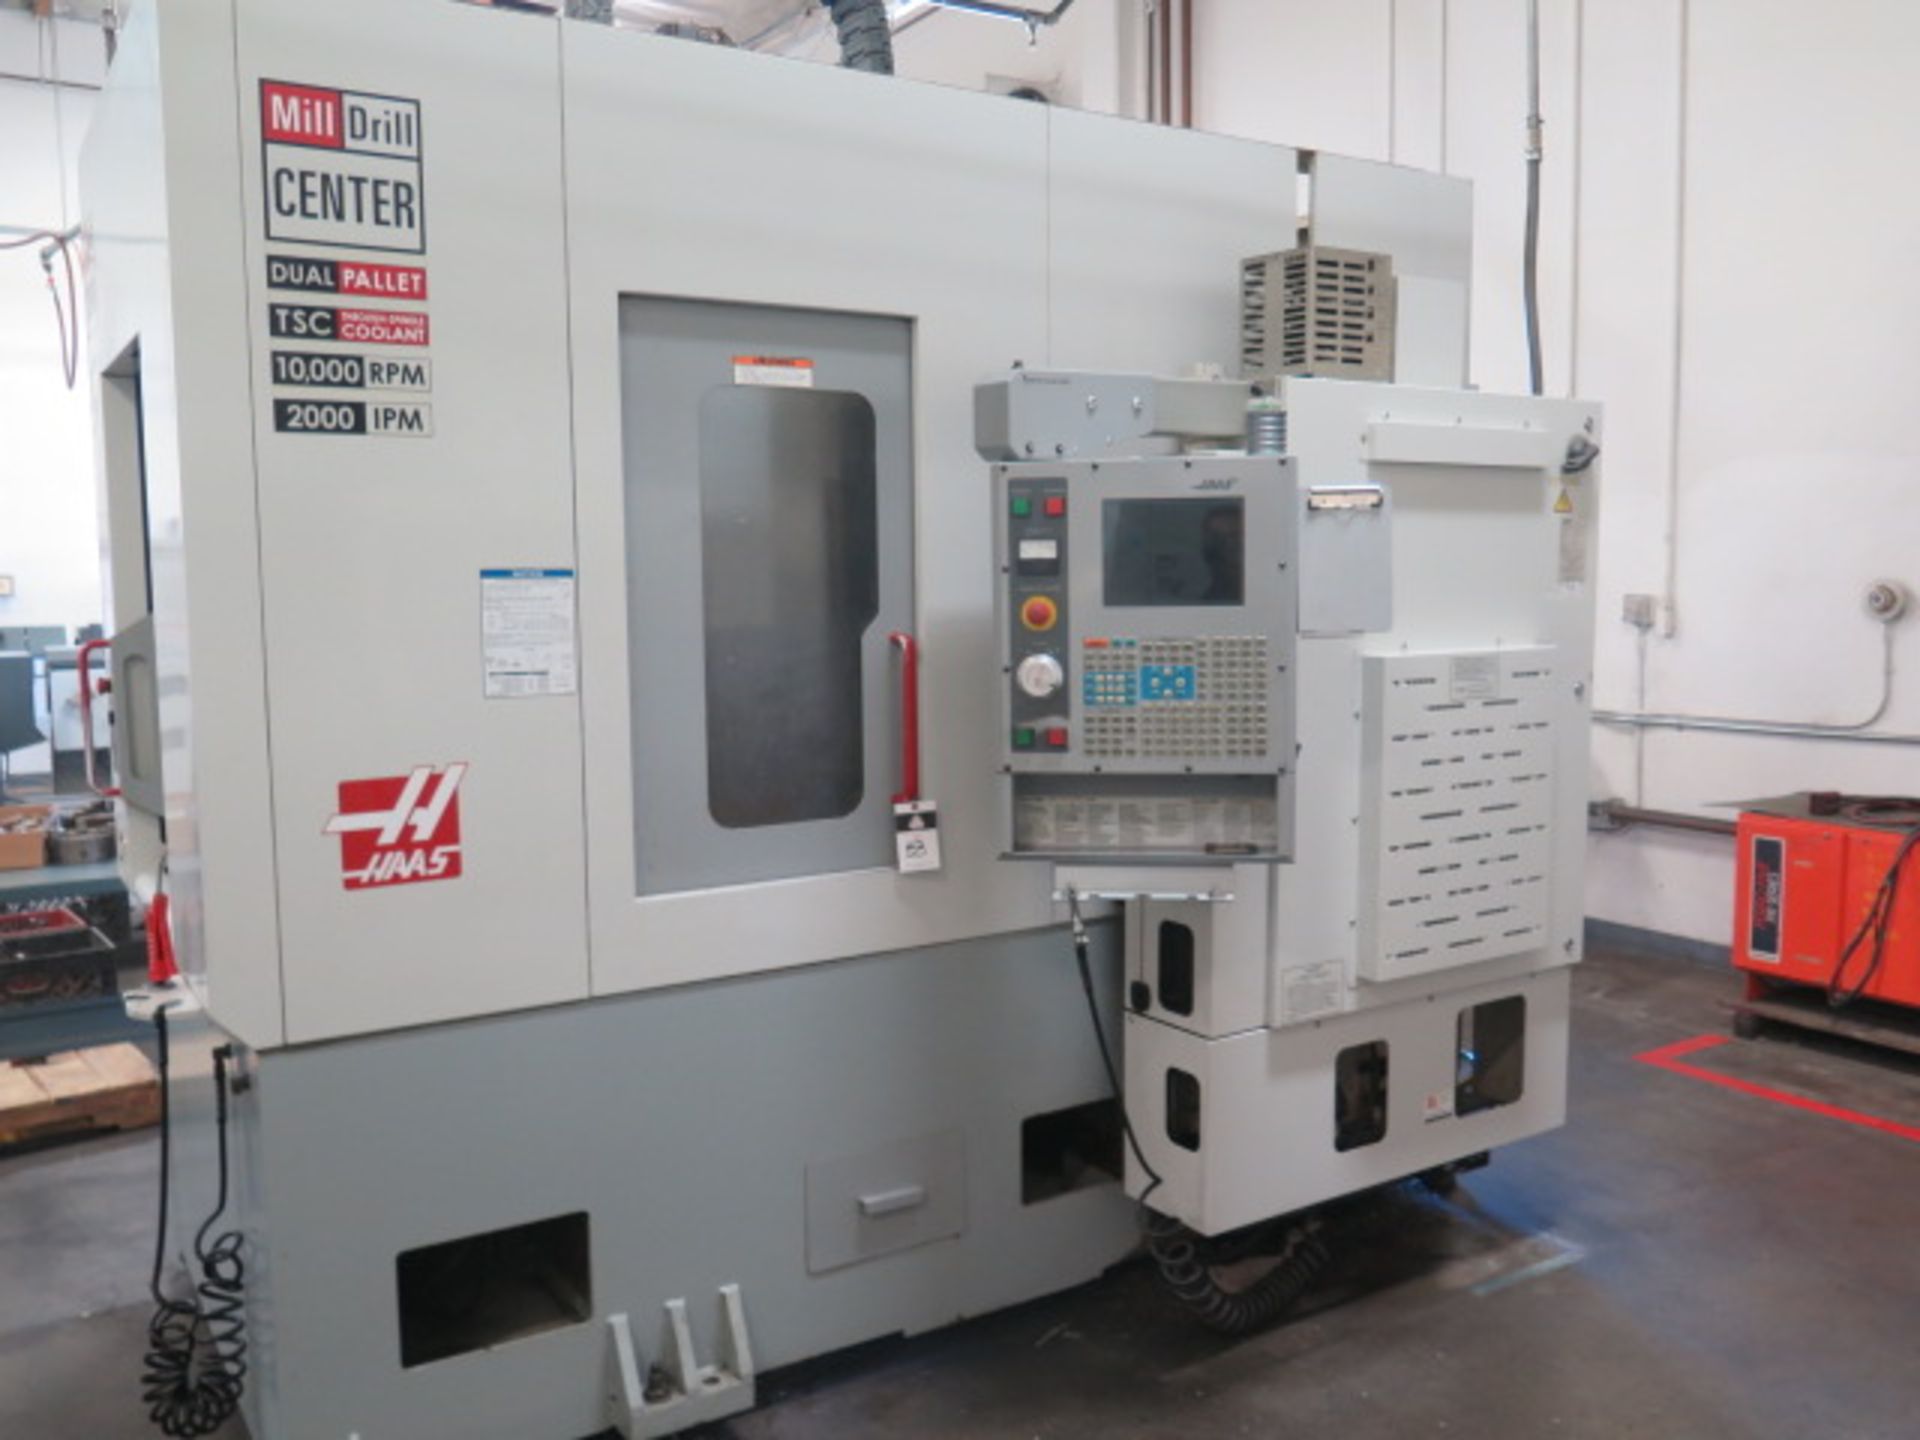 2003 Haas MDC-1 Dual Pallet CNC Milling / Drilling Center s/n 32186 w/ Haas Controls, SOLD AS IS - Image 2 of 12